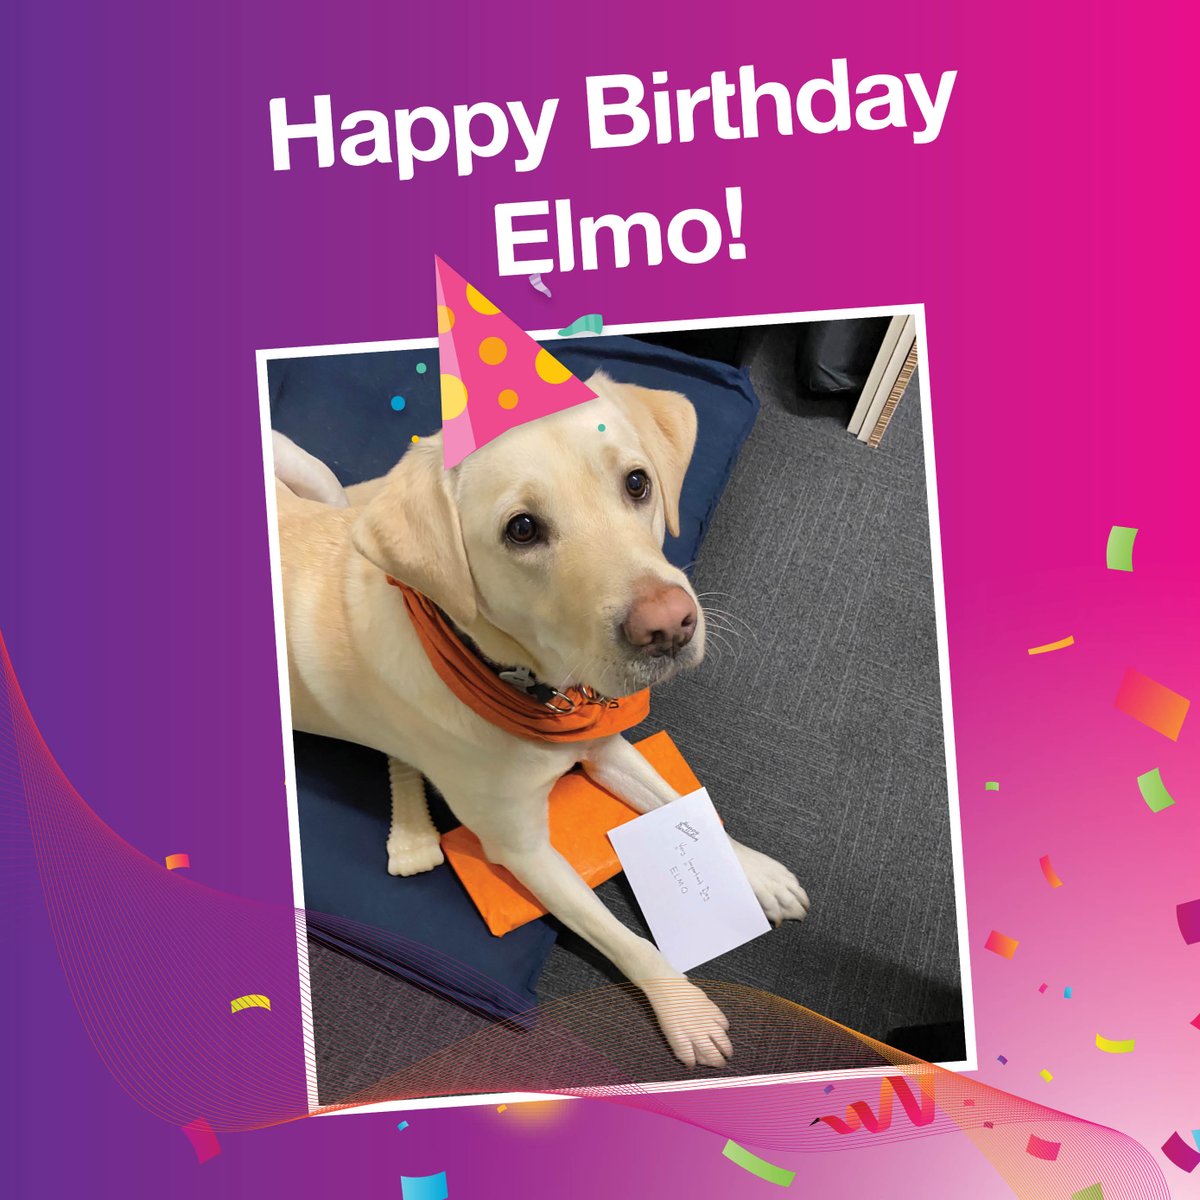 Happy 3rd Birthday to our favourite four-legged team member Elmo! 🐕 No time for a paw-ty when you are busy helping customers feel happy and calm on their journey through the airport. 💜 #Elmo #ADLAmbassaPaws #AirportDog #GuideDogsAustralia